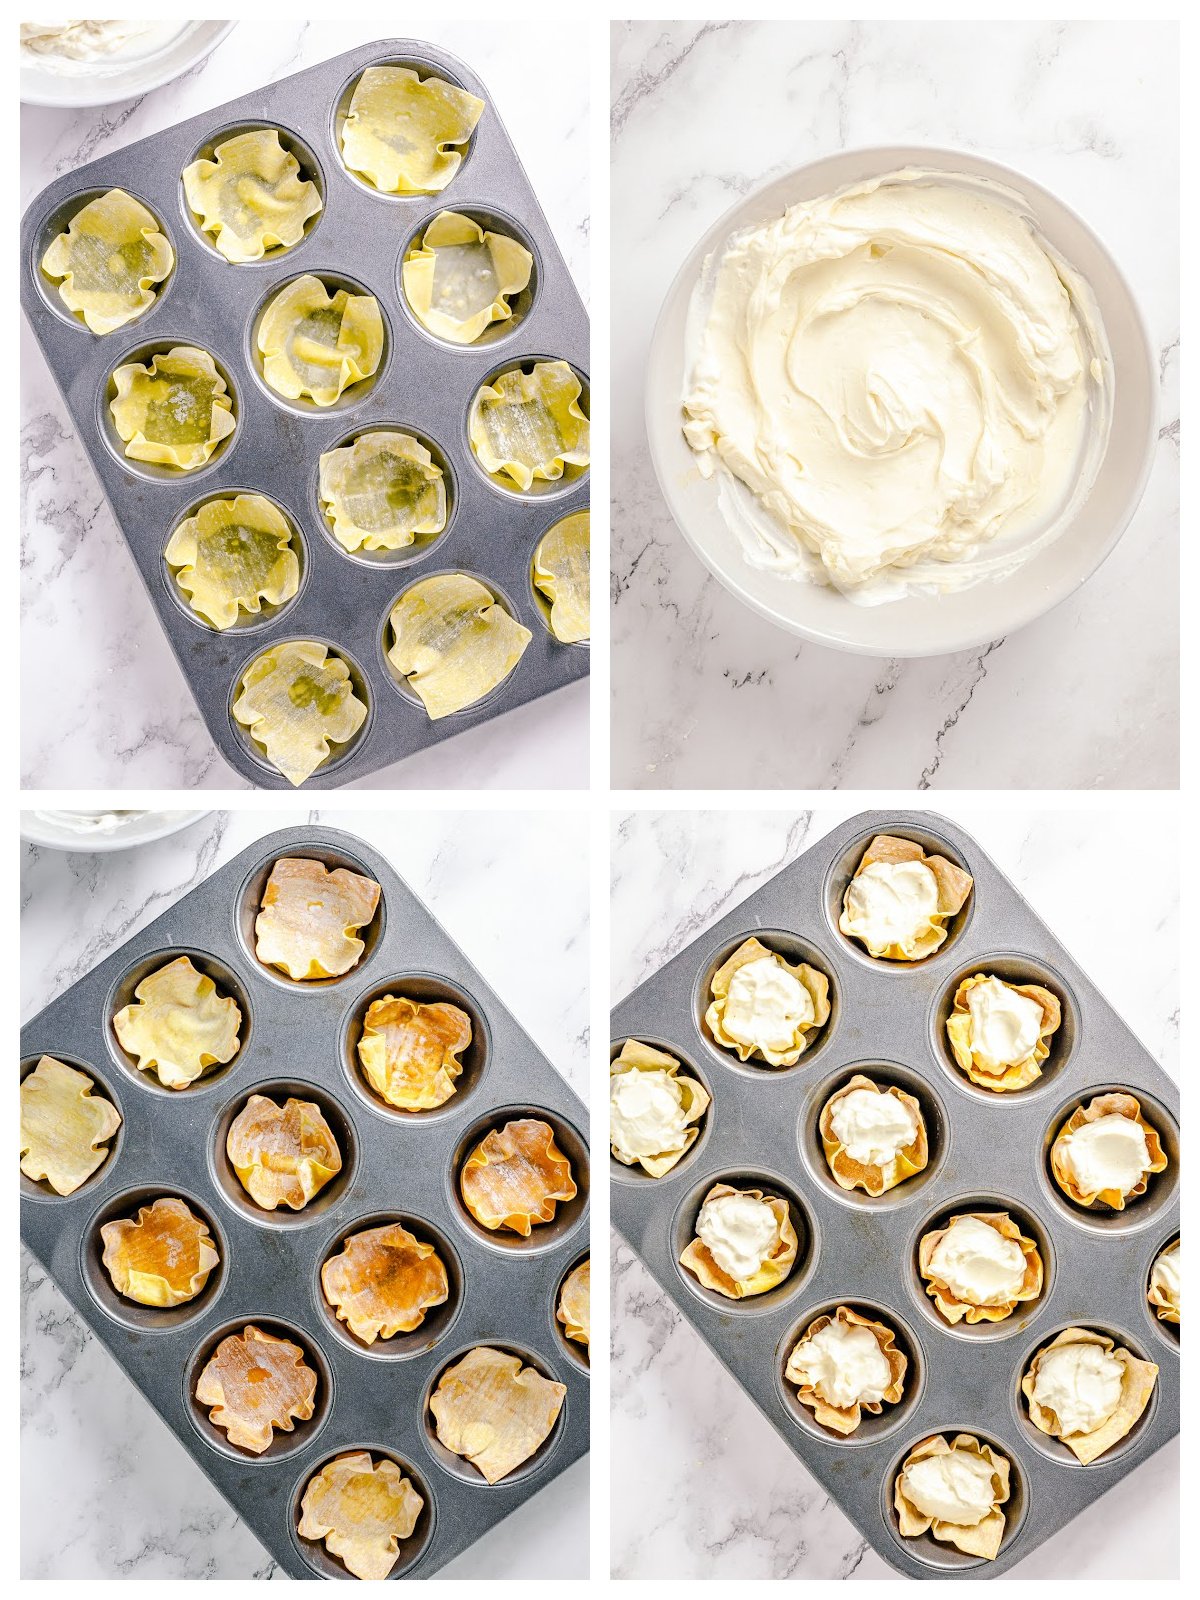 Step by step photos on how to make Baked Cream Cheese Wonton Cups.